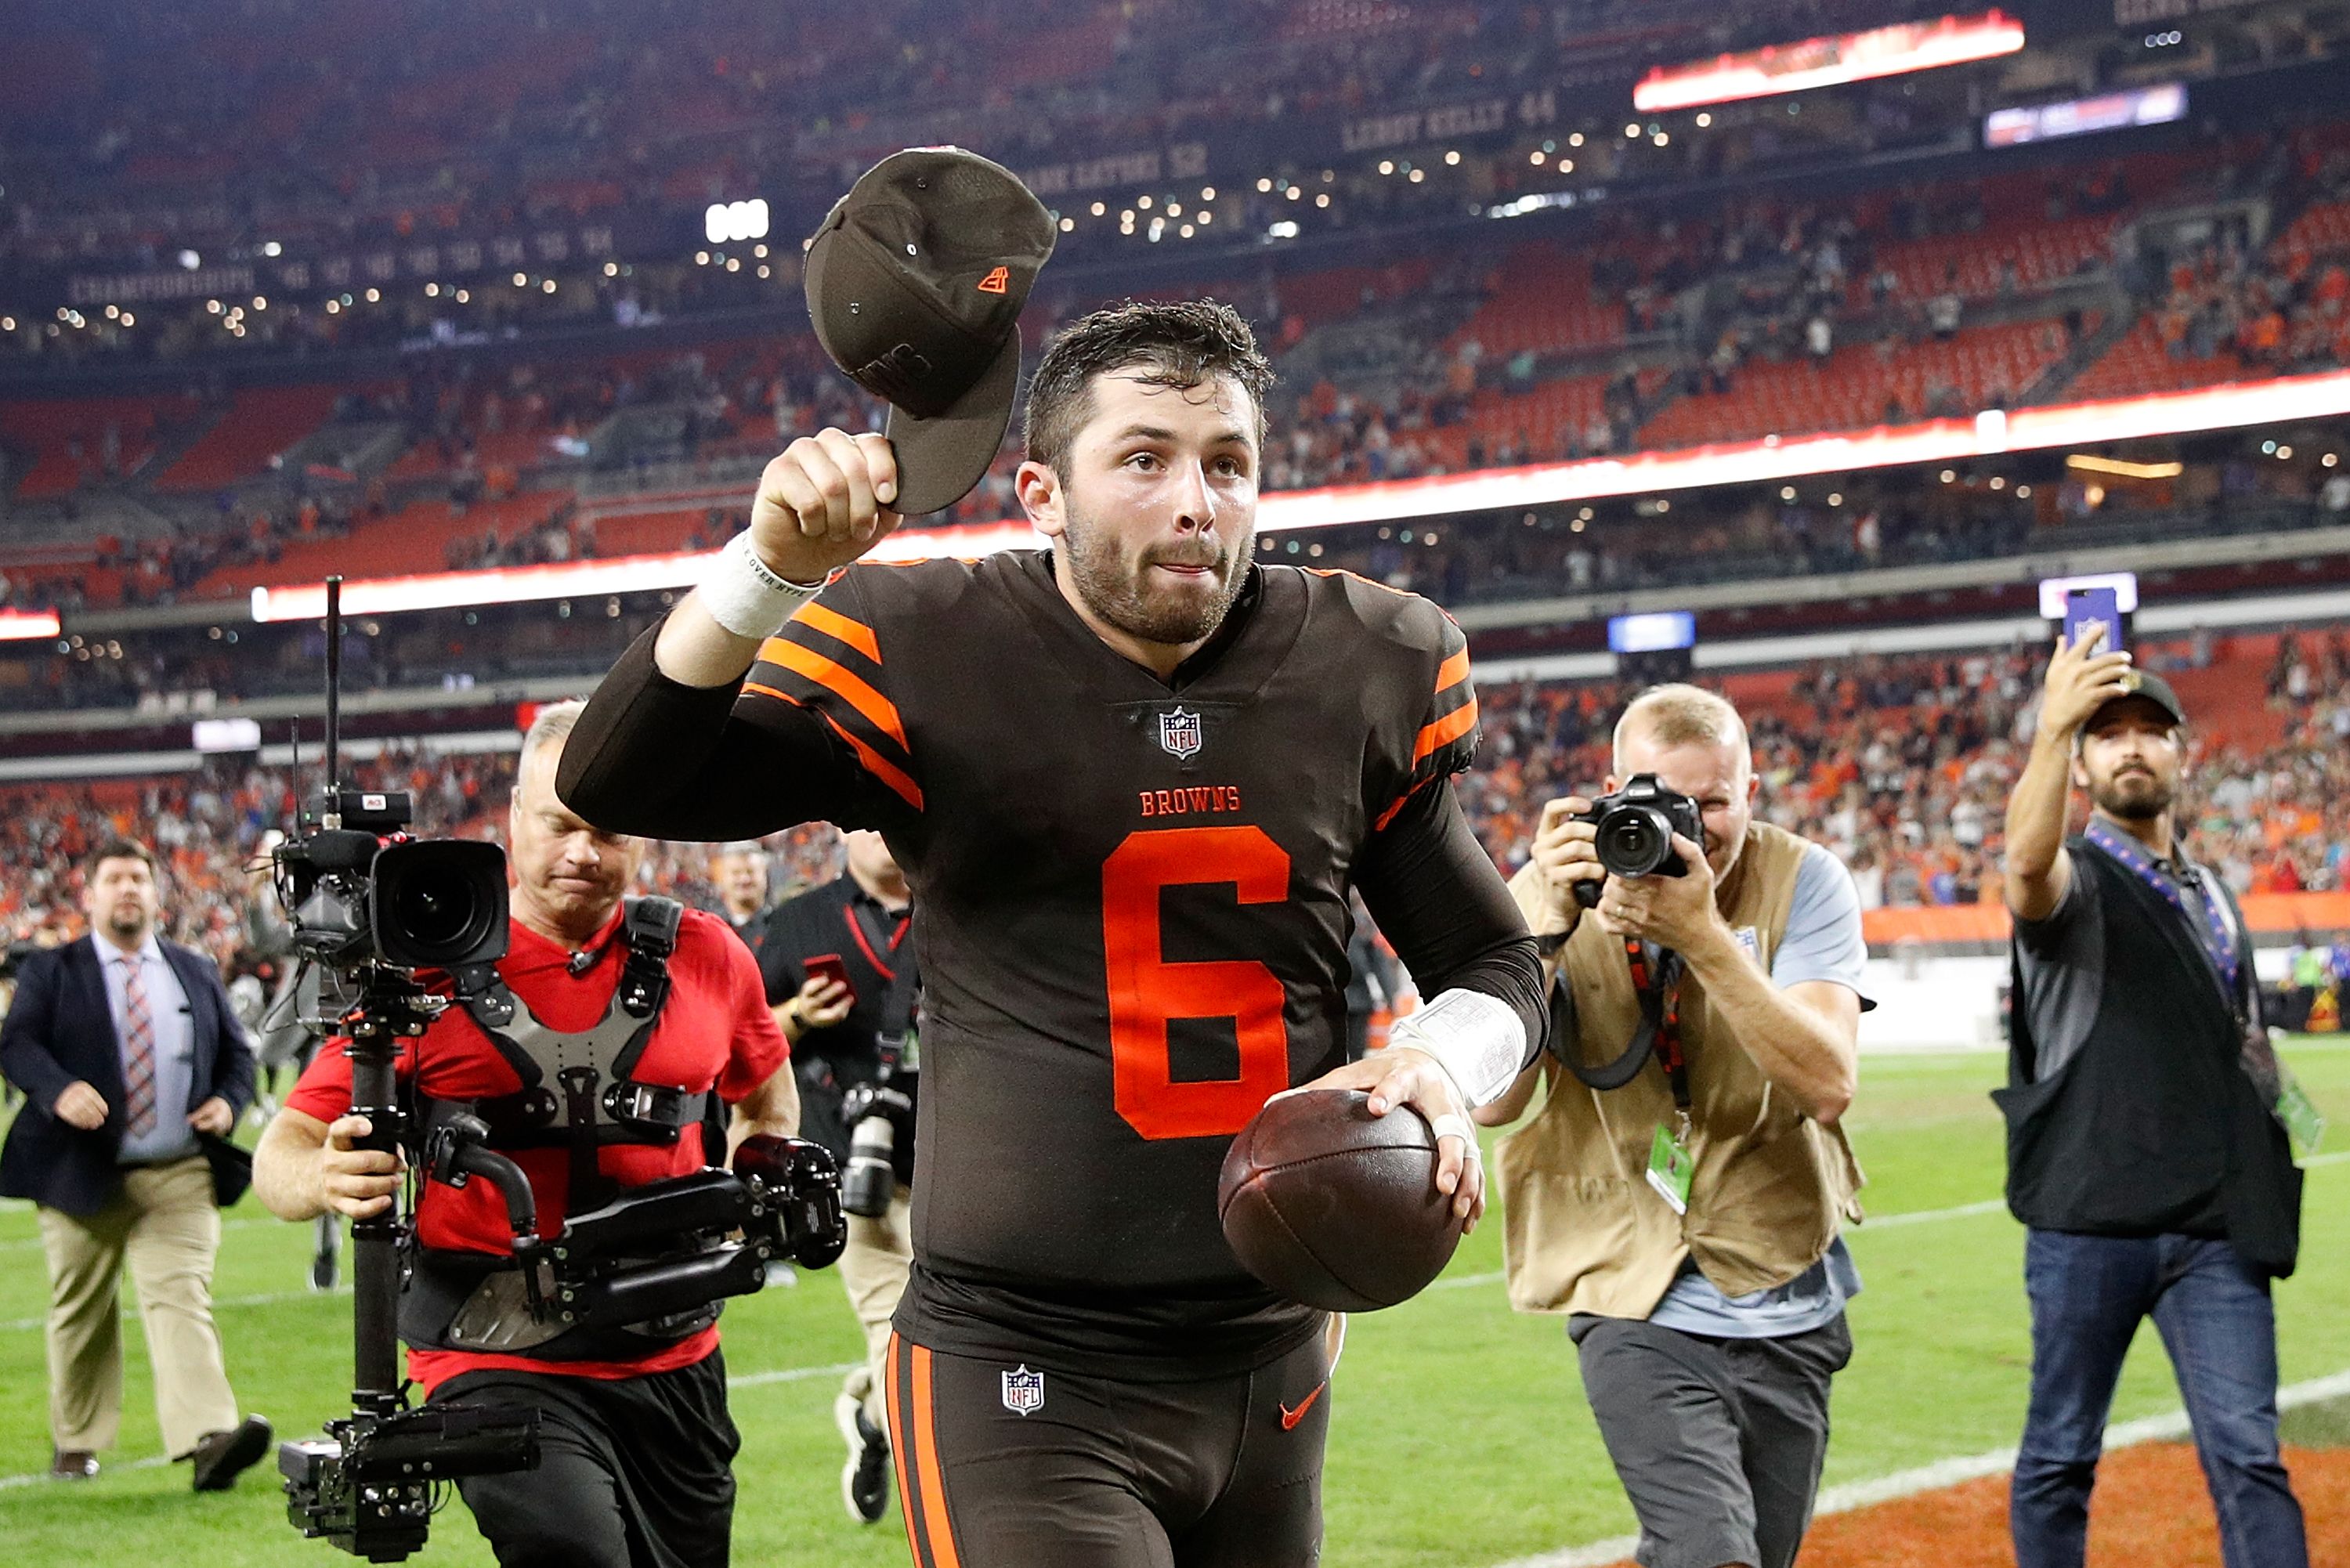 Baker Mayfield Ends Cleveland Browns' 635-Day Winless Streak - The